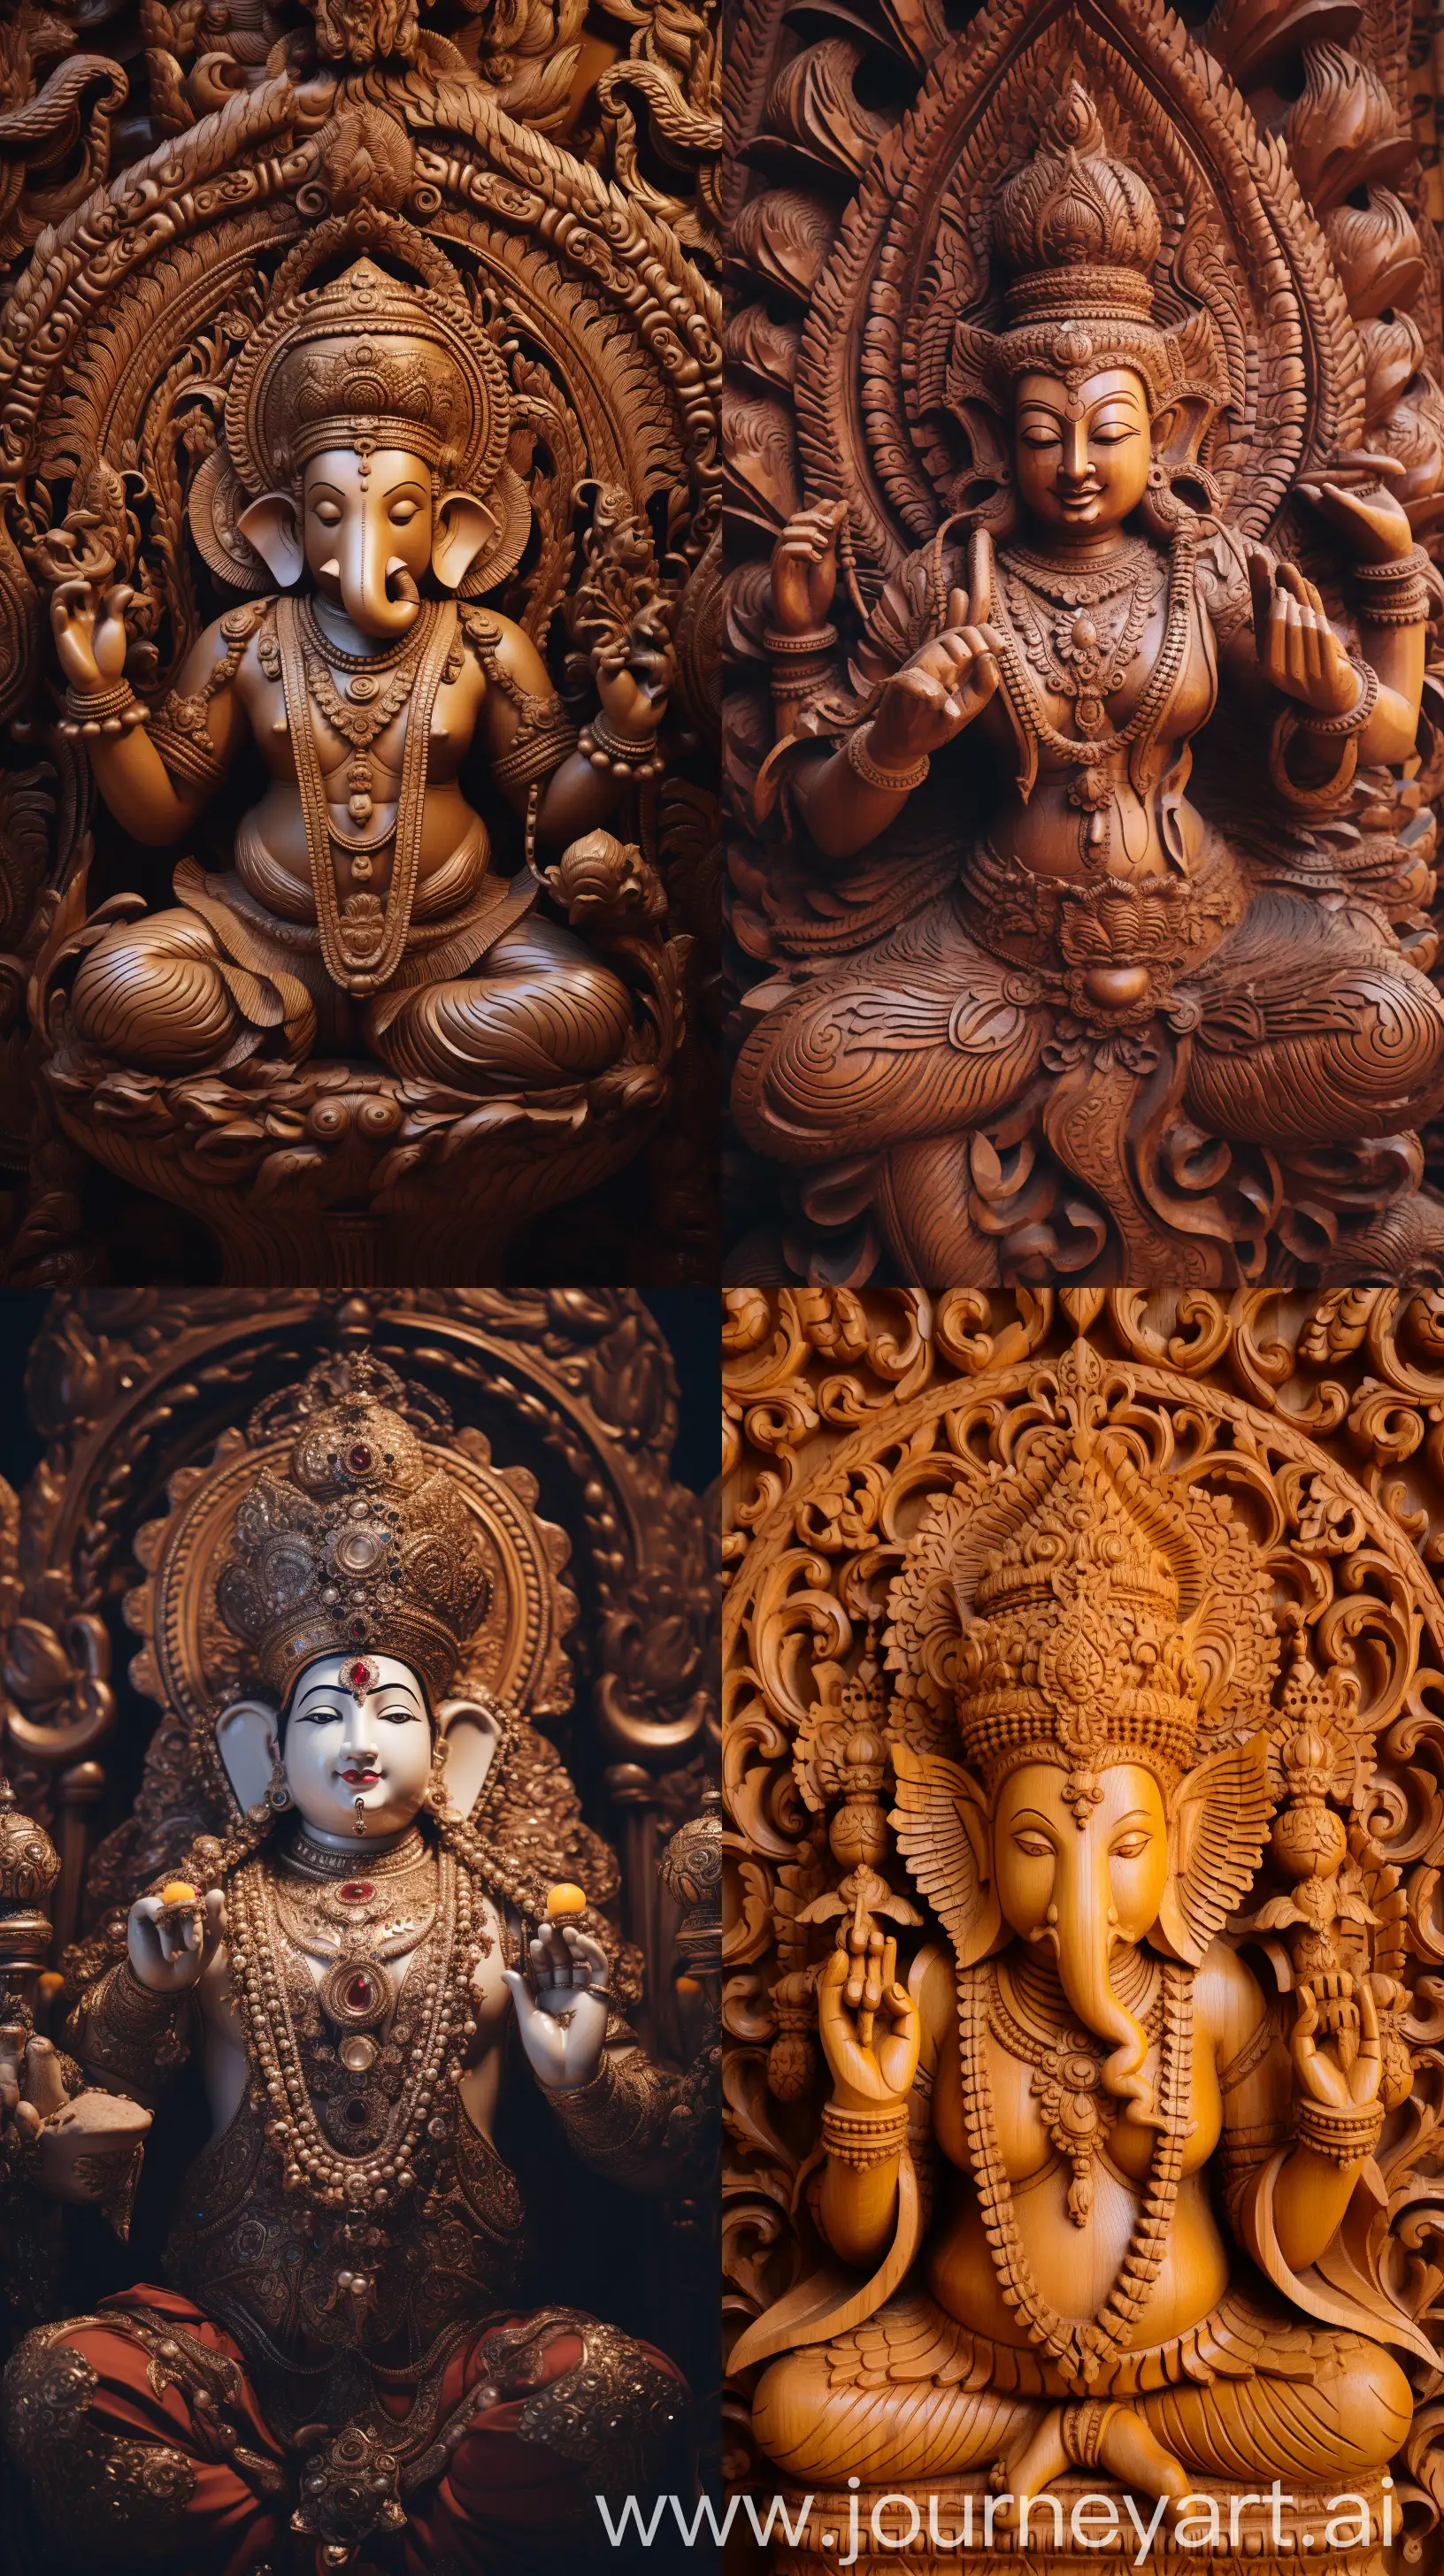 Lord-Ganesh-Closeup-Depiction-with-Ornate-Details-in-High-Resolution